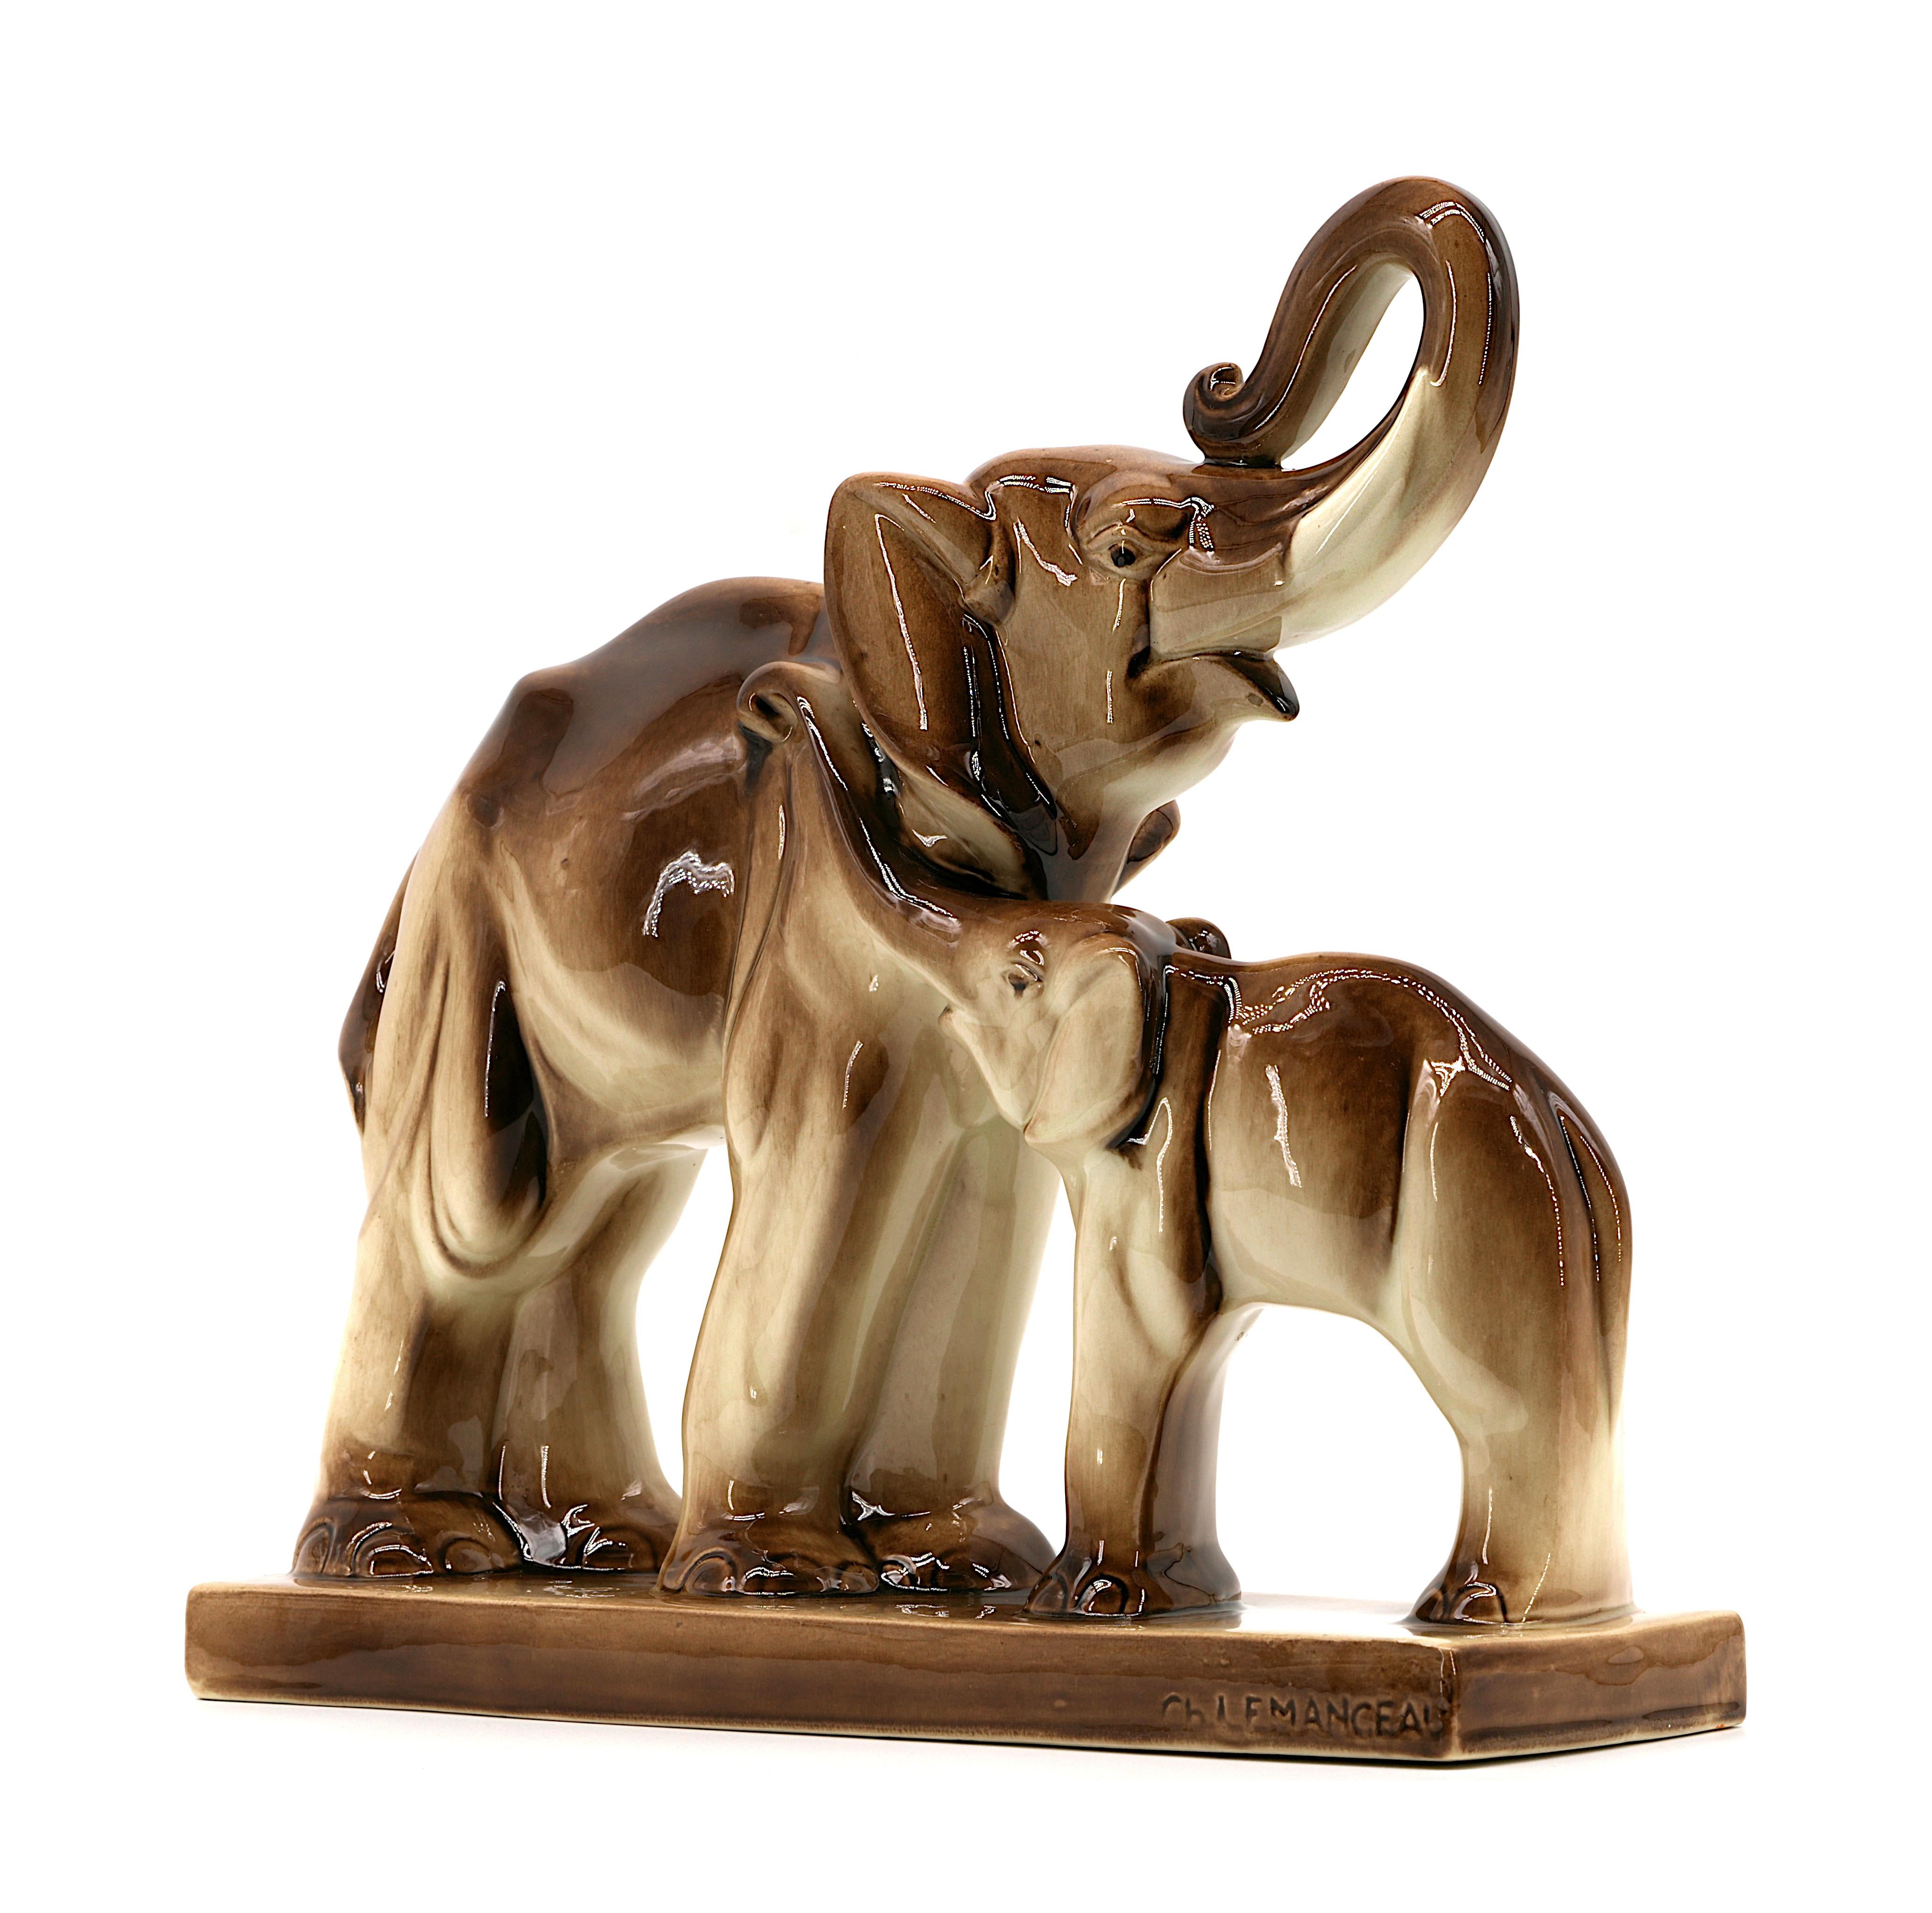 Charles Lemanceau French Art Deco Elephants Mother and Child, 1935 In Excellent Condition For Sale In Saint-Amans-des-Cots, FR